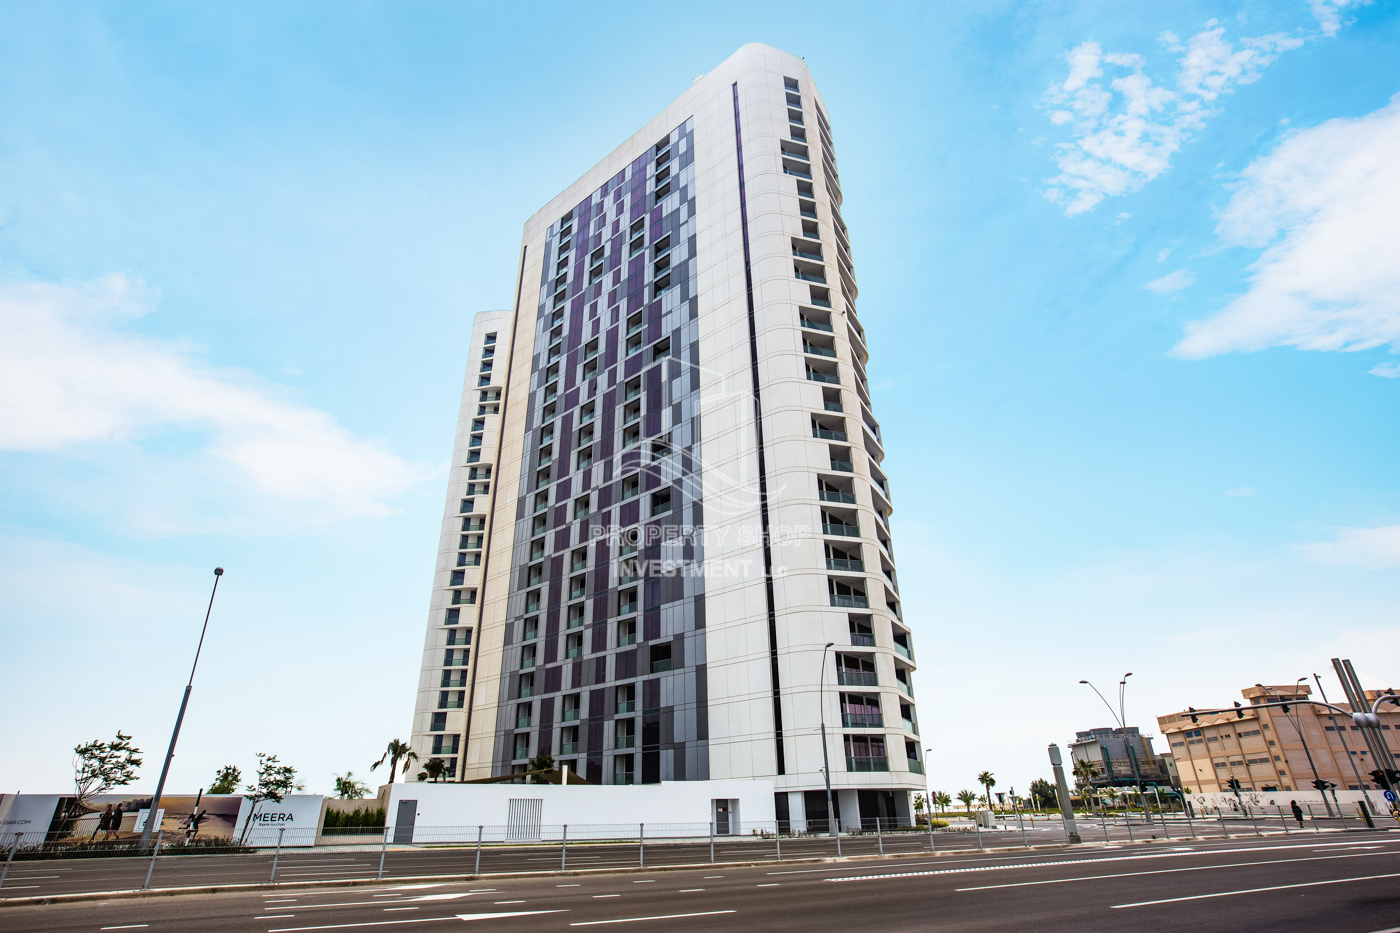 Meera Tower, 1br, high quality apartment